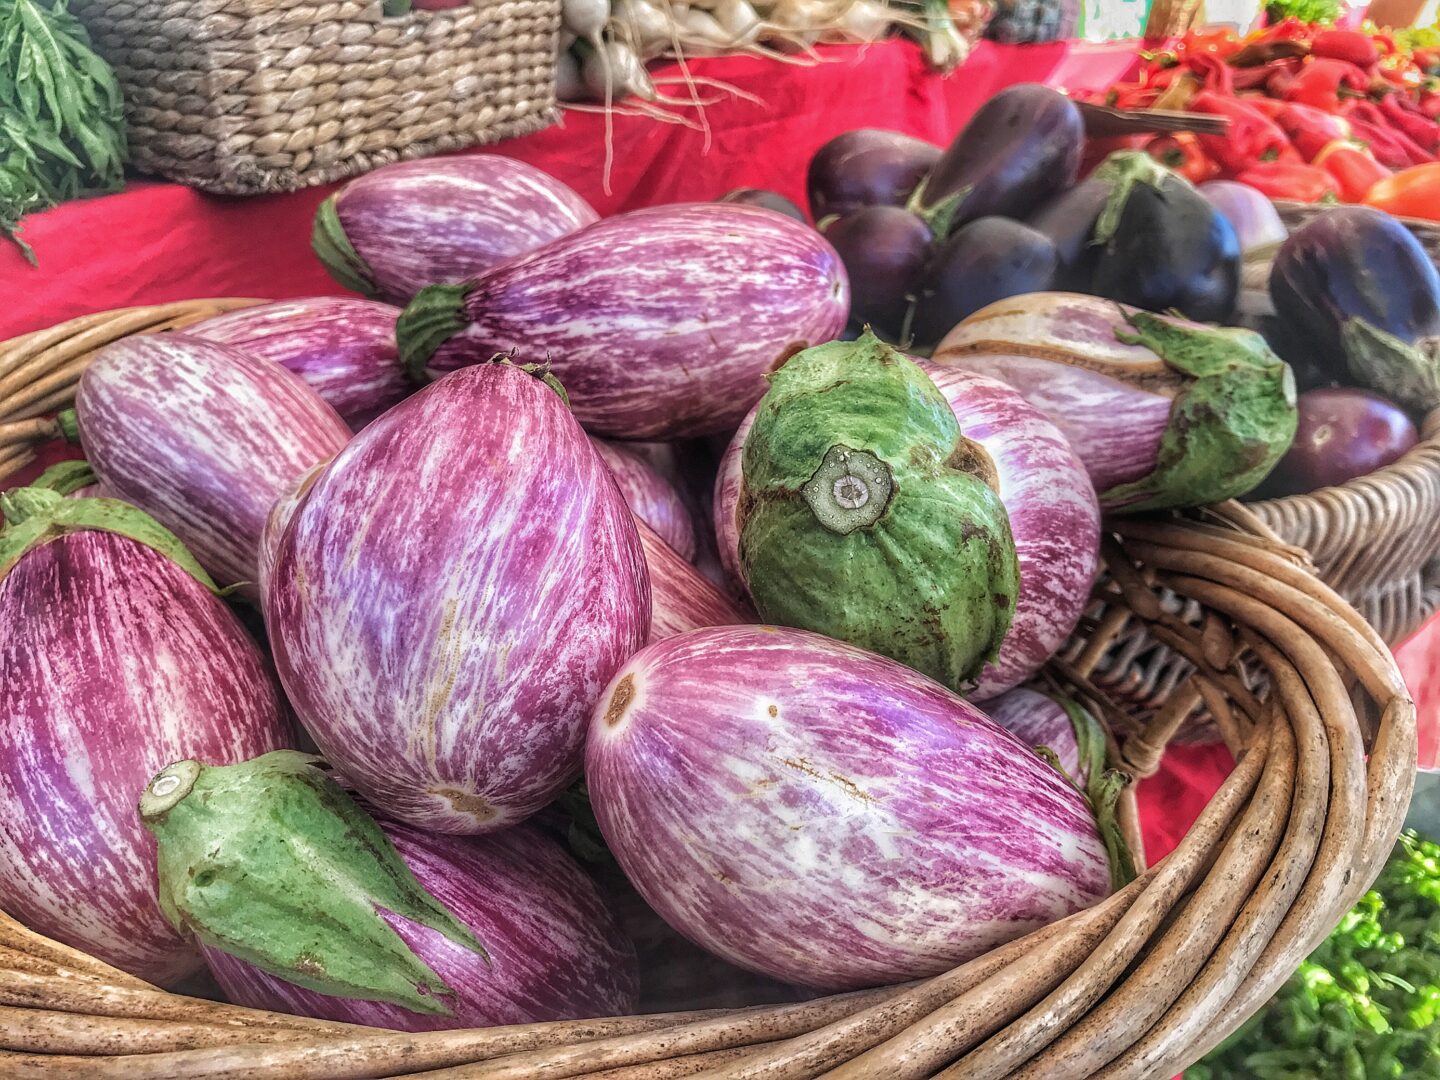 Purple eggplants in a basket on a table at a farmers' market.